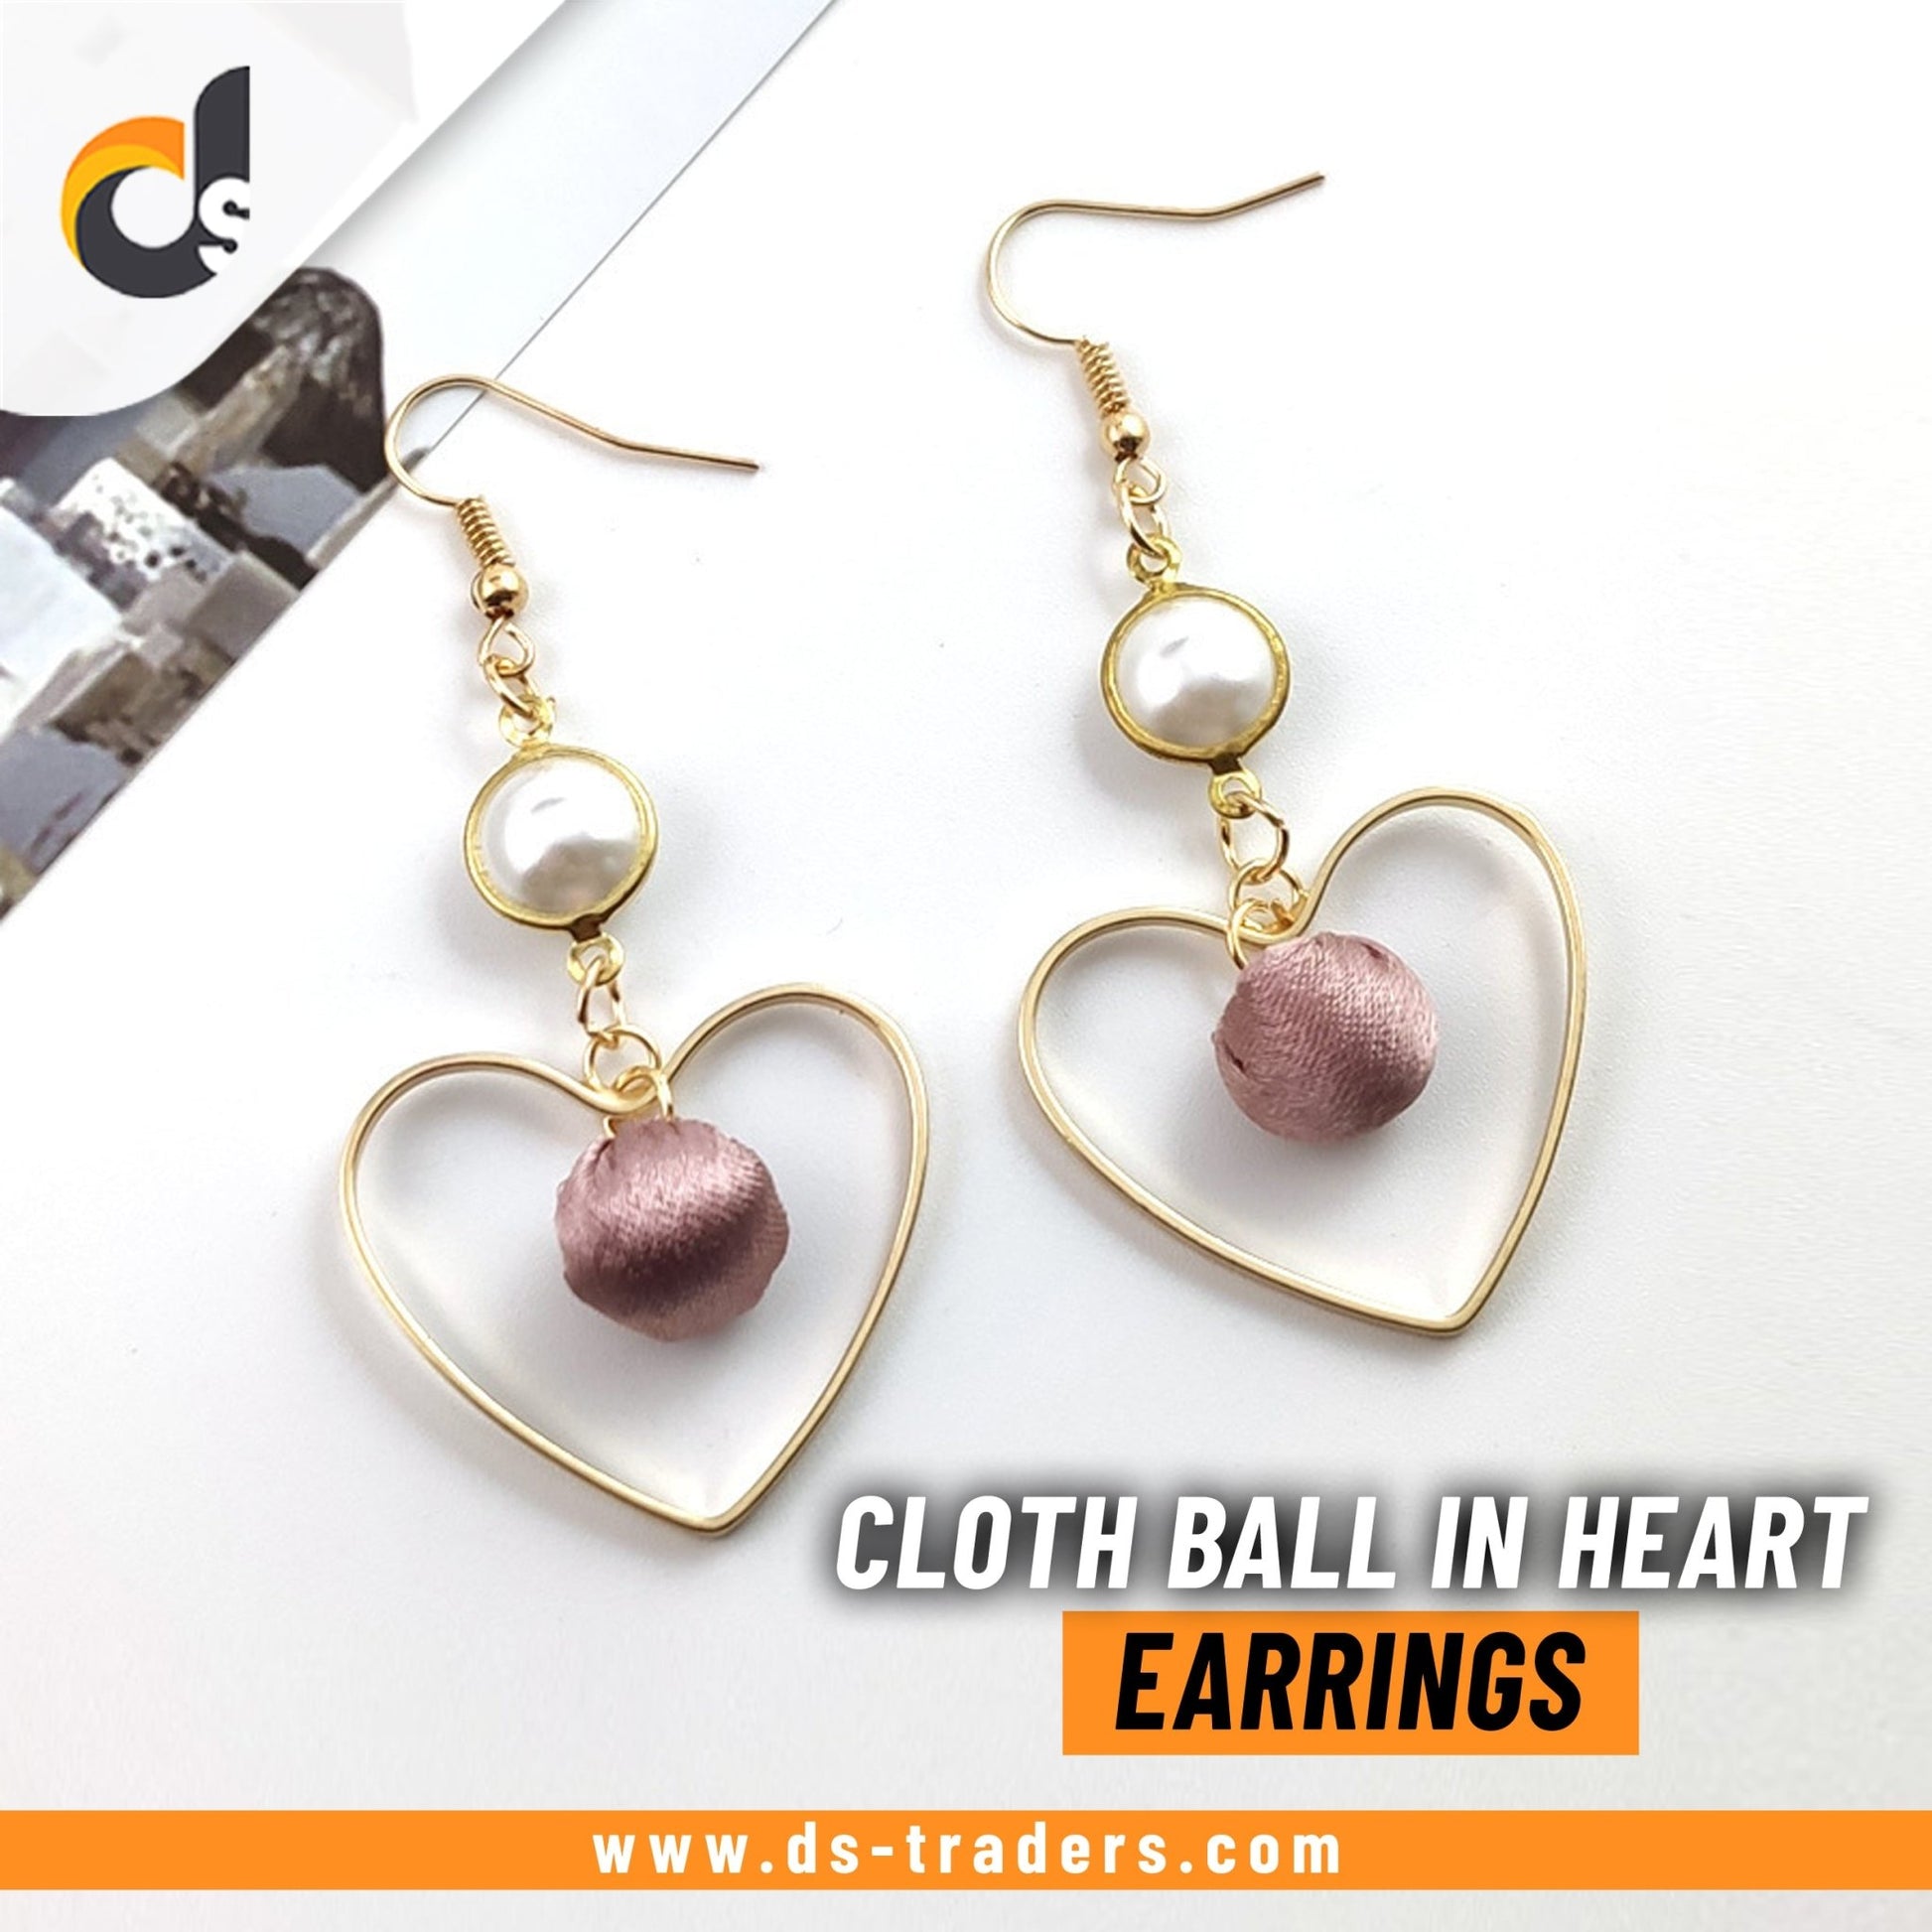 Cloth Ball in Heart Earrings - DS Traders